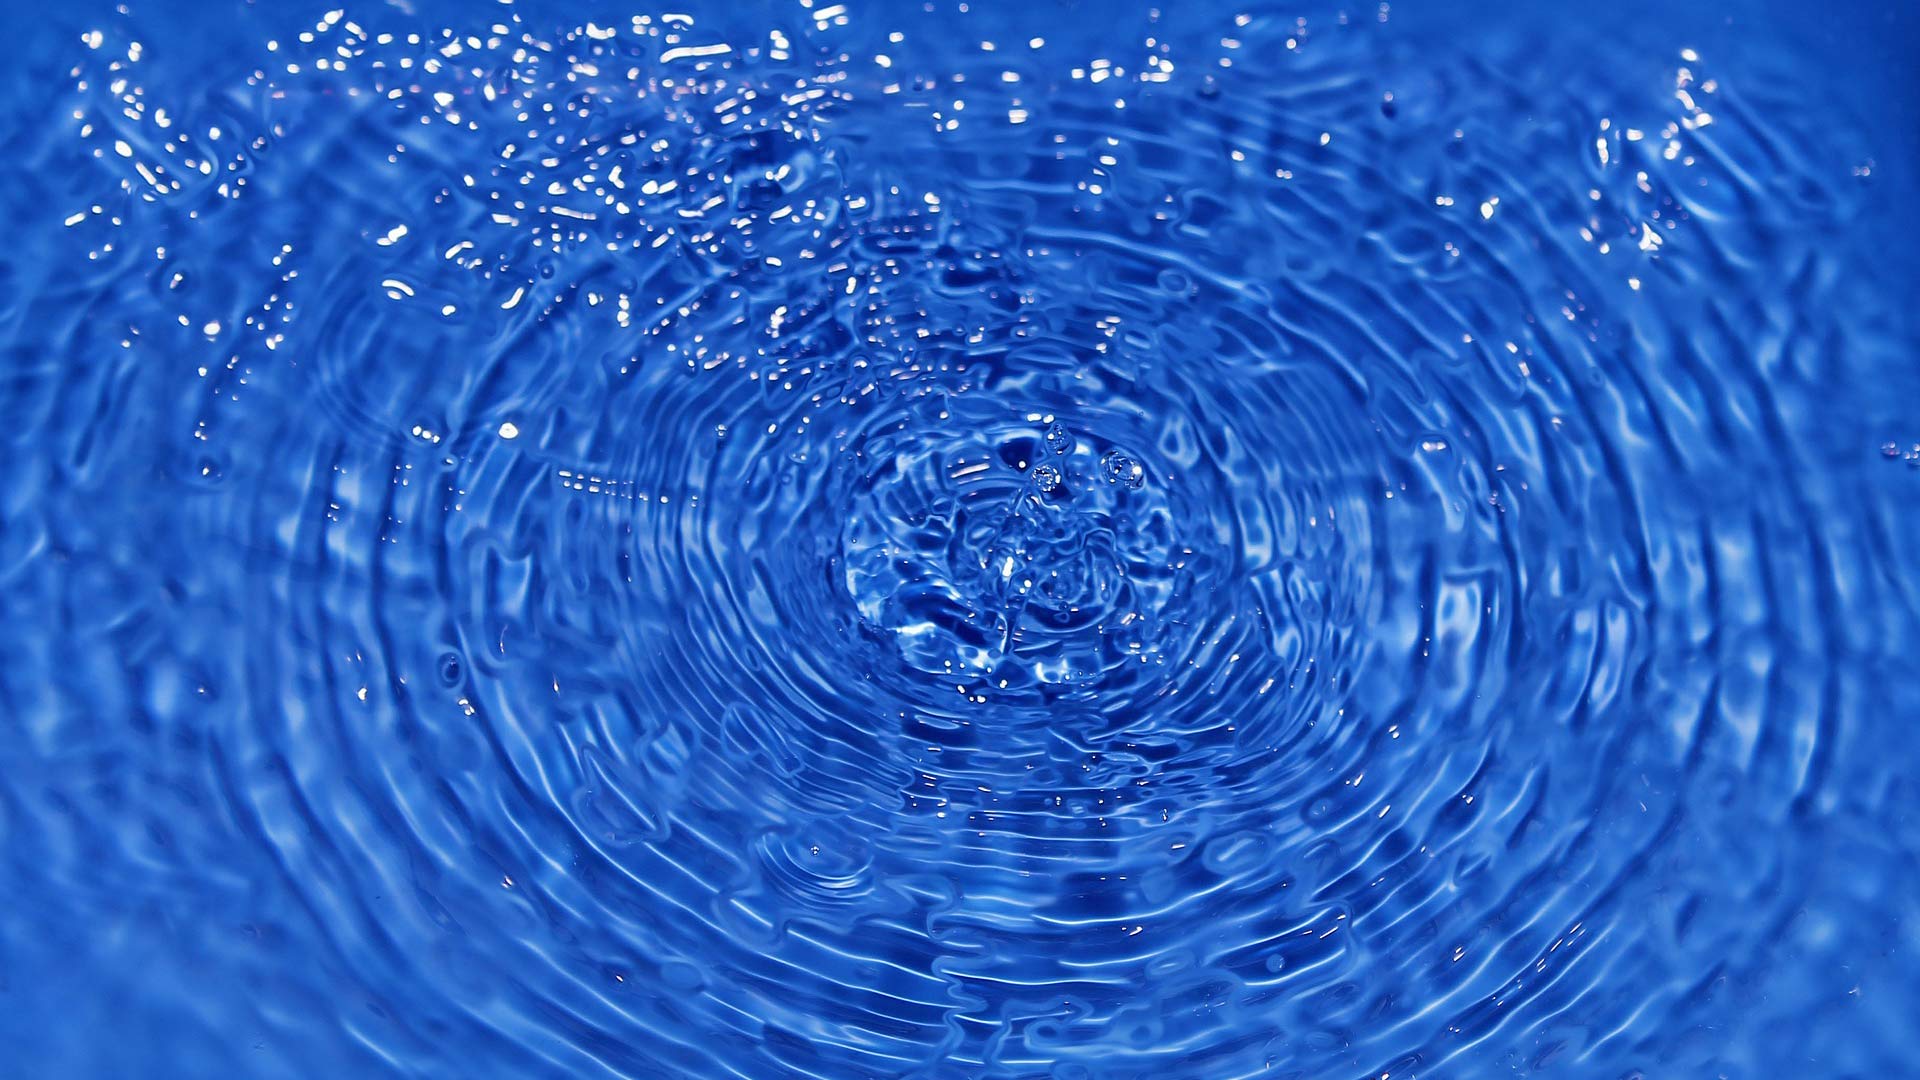 Drops and ripples in water.